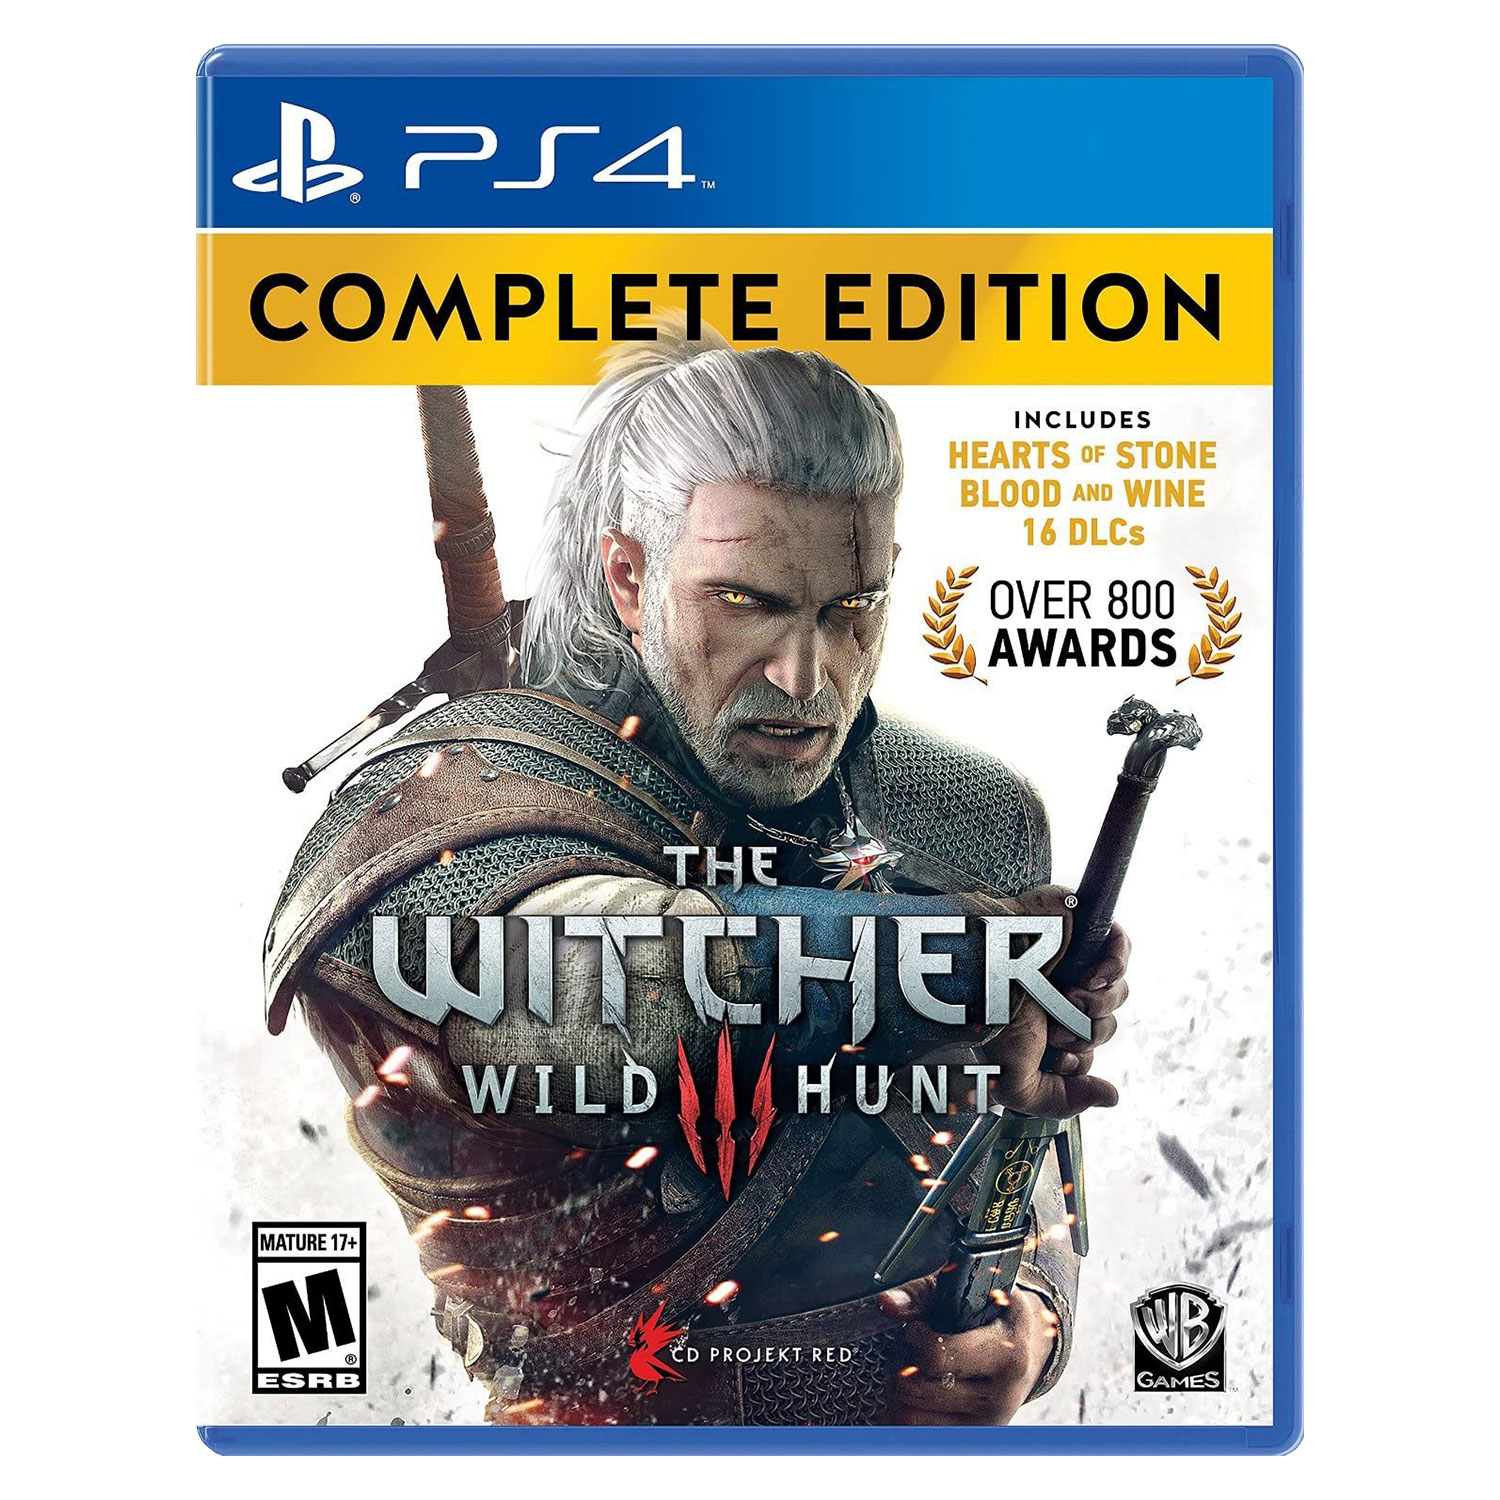 Jogo The Witcher 3 Wild Hunt Complete Edition para PS4